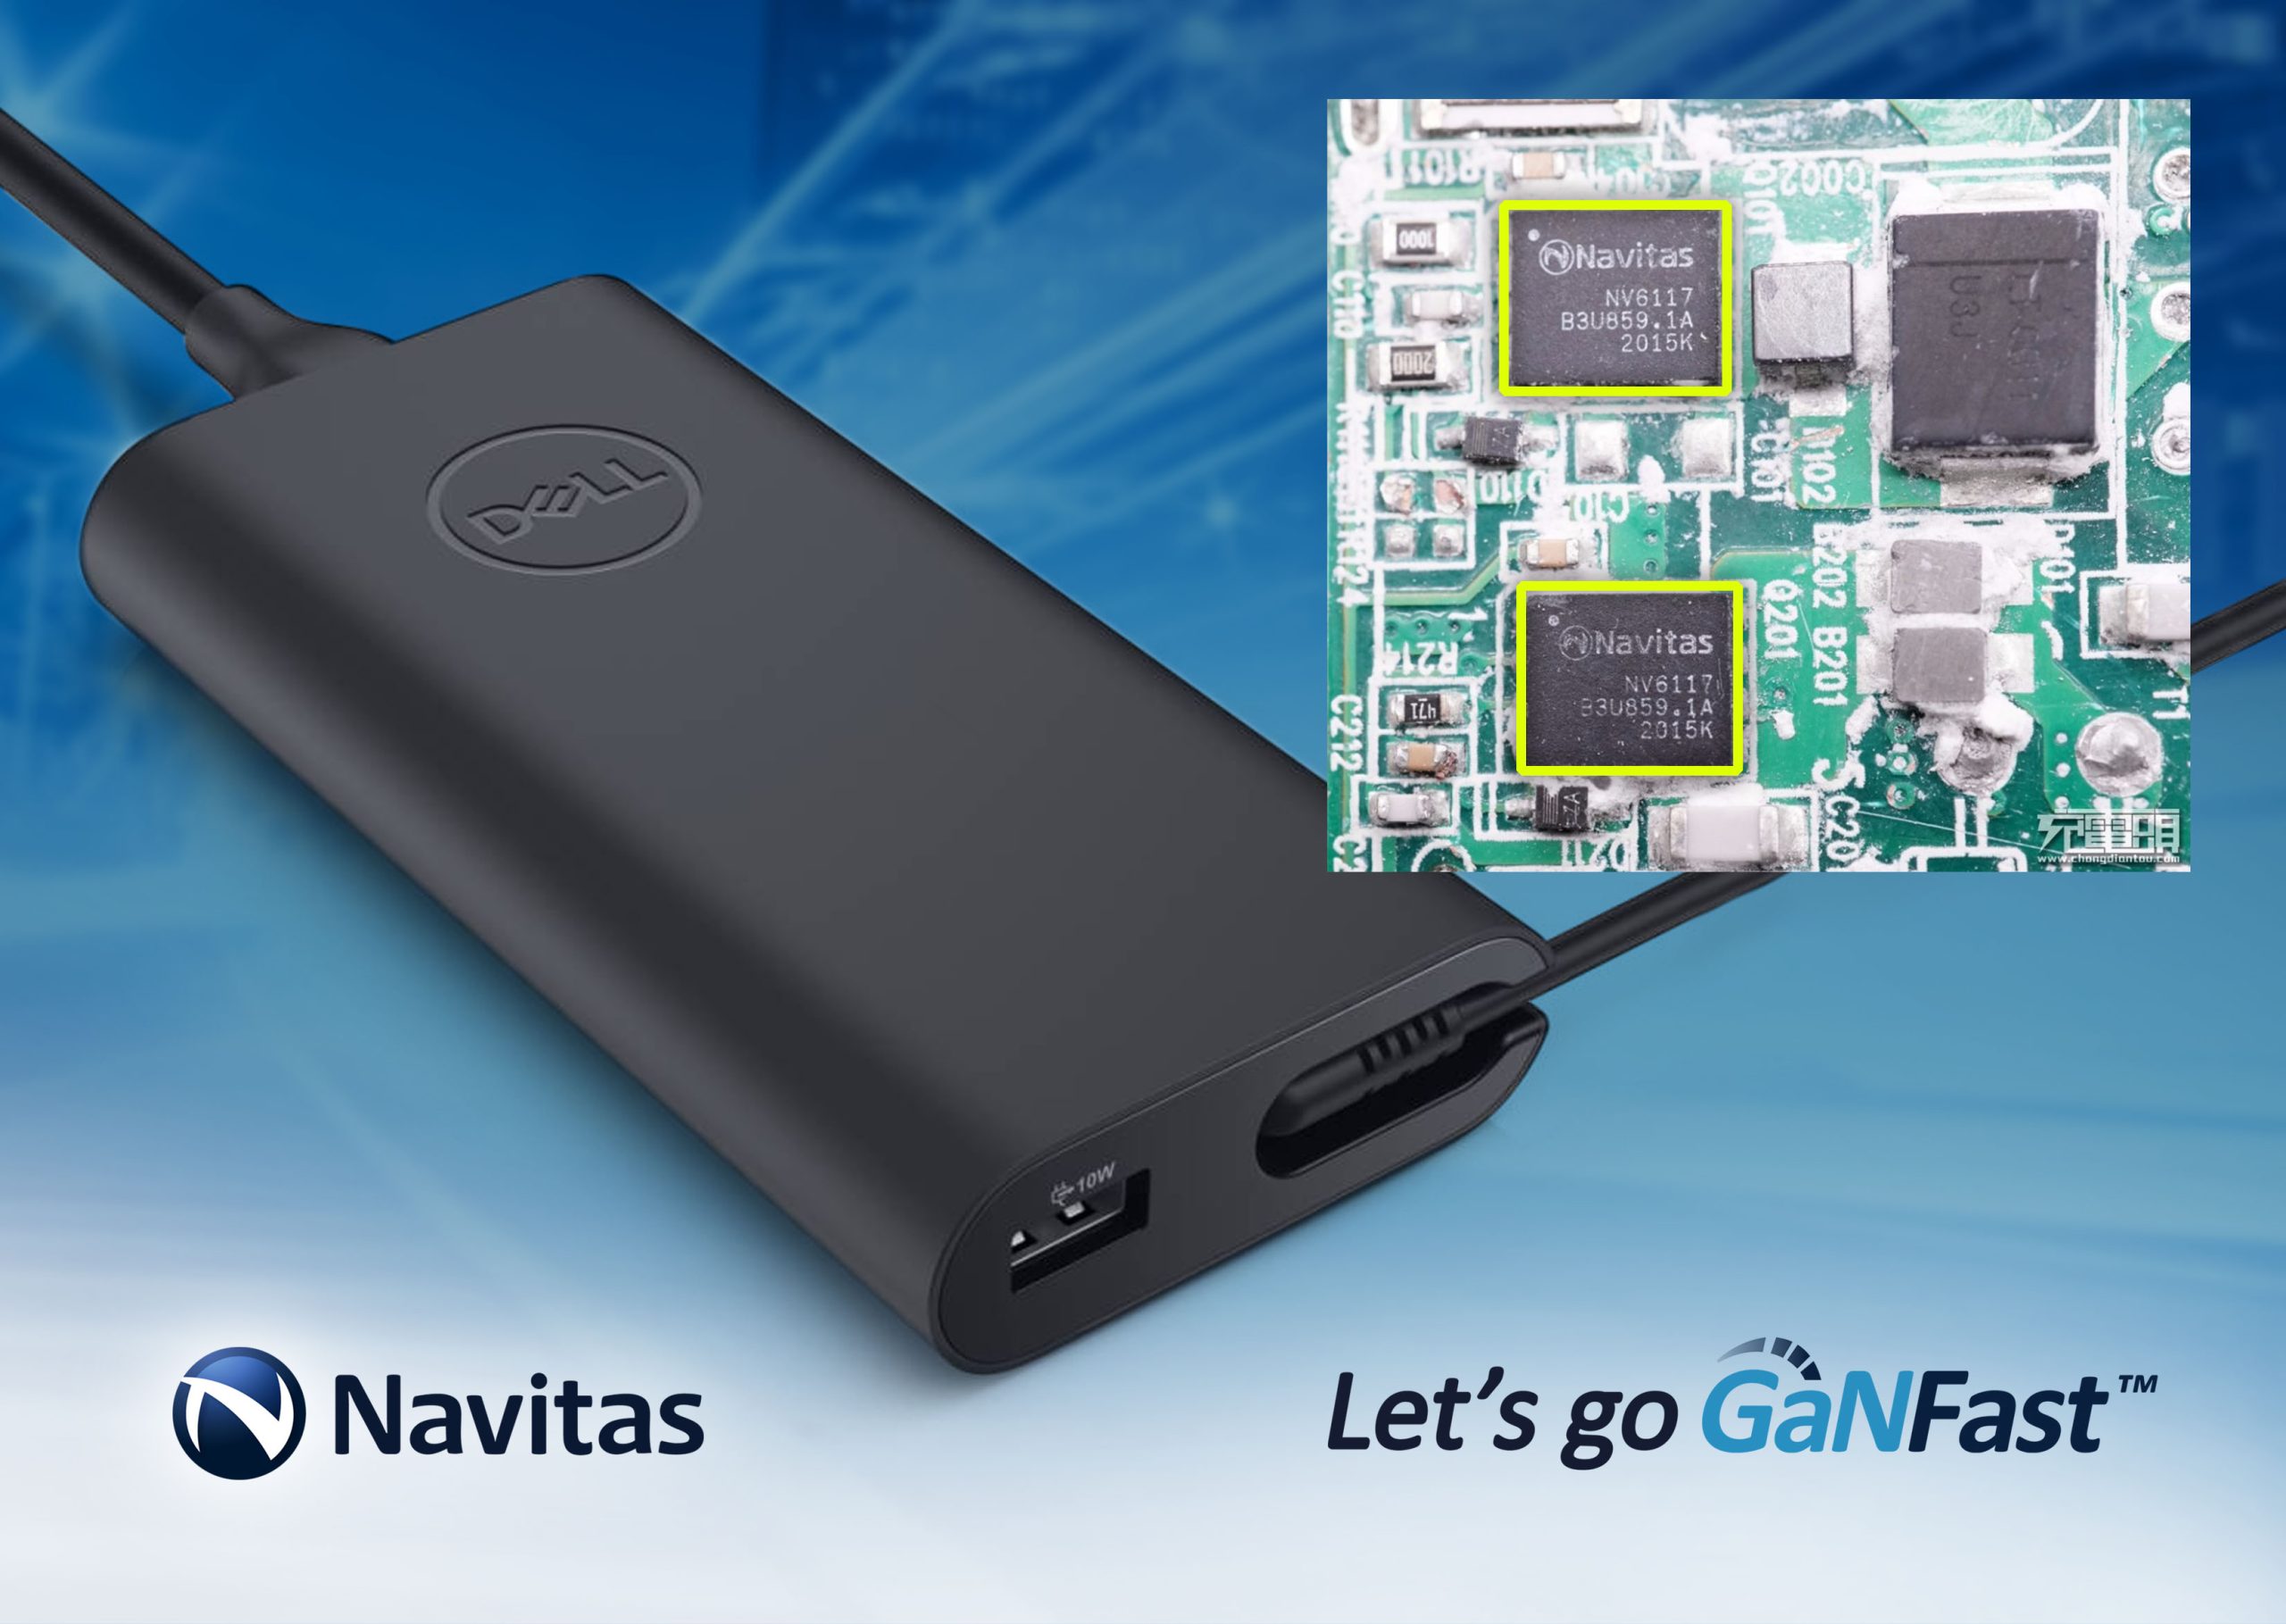 Dell Adopts Navitas GaNFast Technology for Laptop Fast Charger